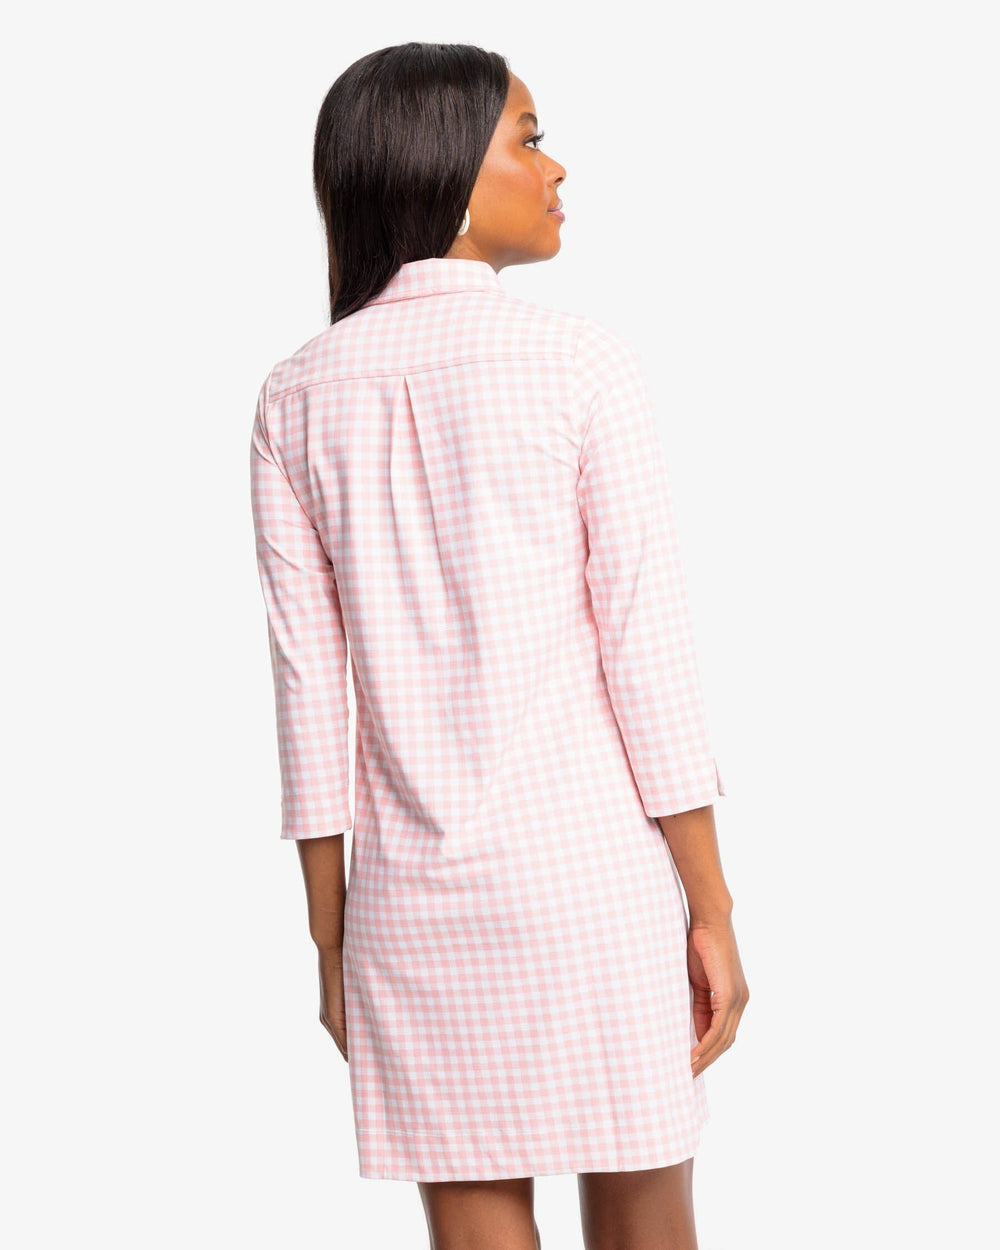 The back view of the Southern Tide Jessica Gingham Performance Dress by Southern Tide - Quartz Pink